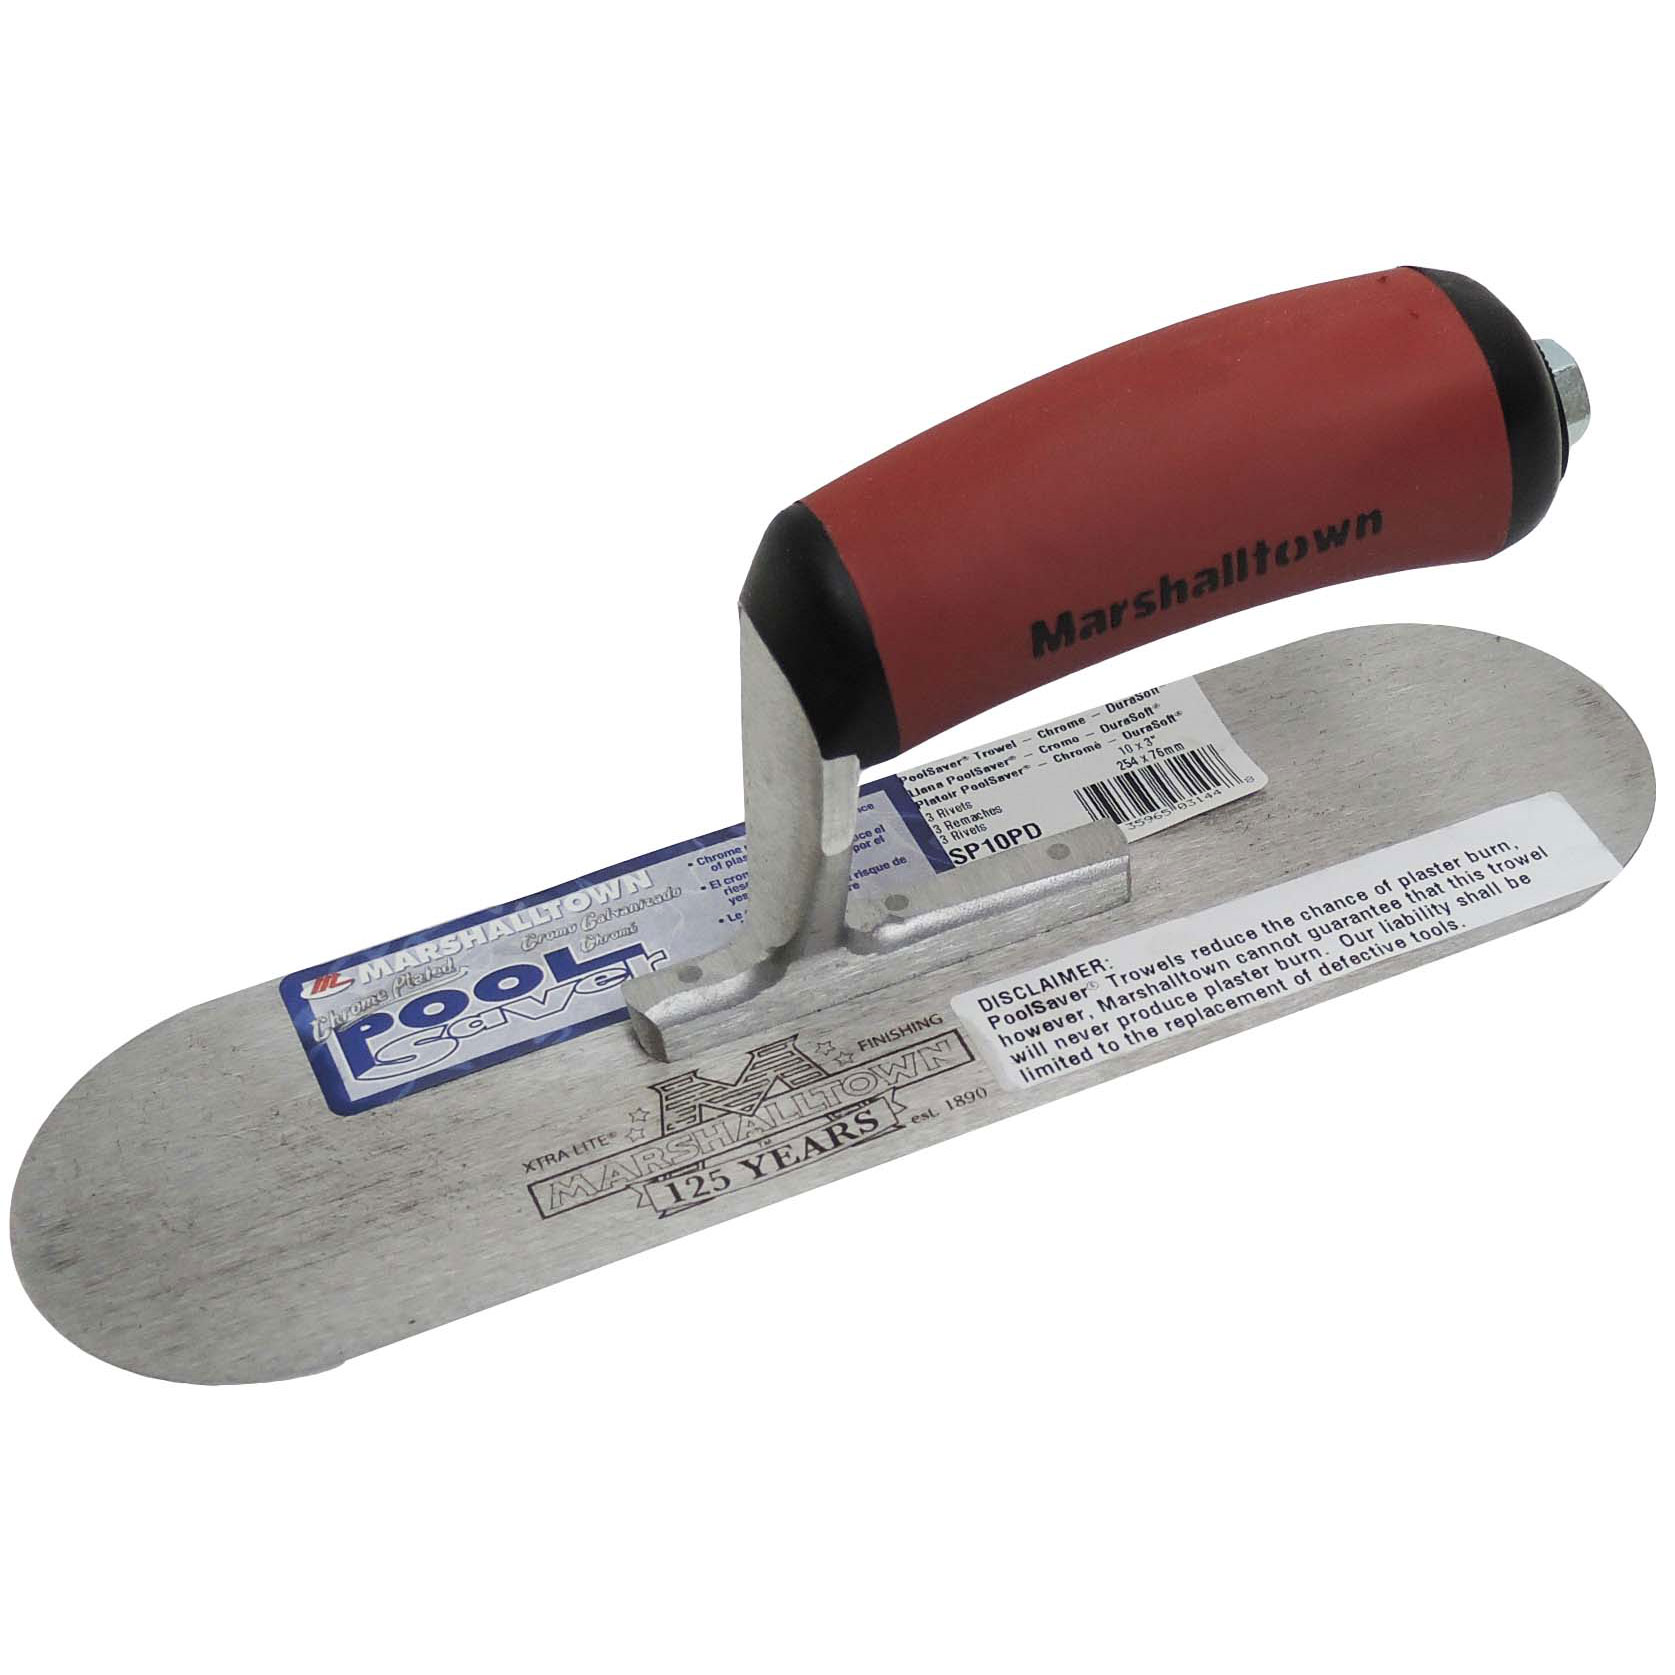 Marshalltown SP12PD 12in x 3-1/2in PoolSaver Trowel with DuraSoft Handle SP12PD